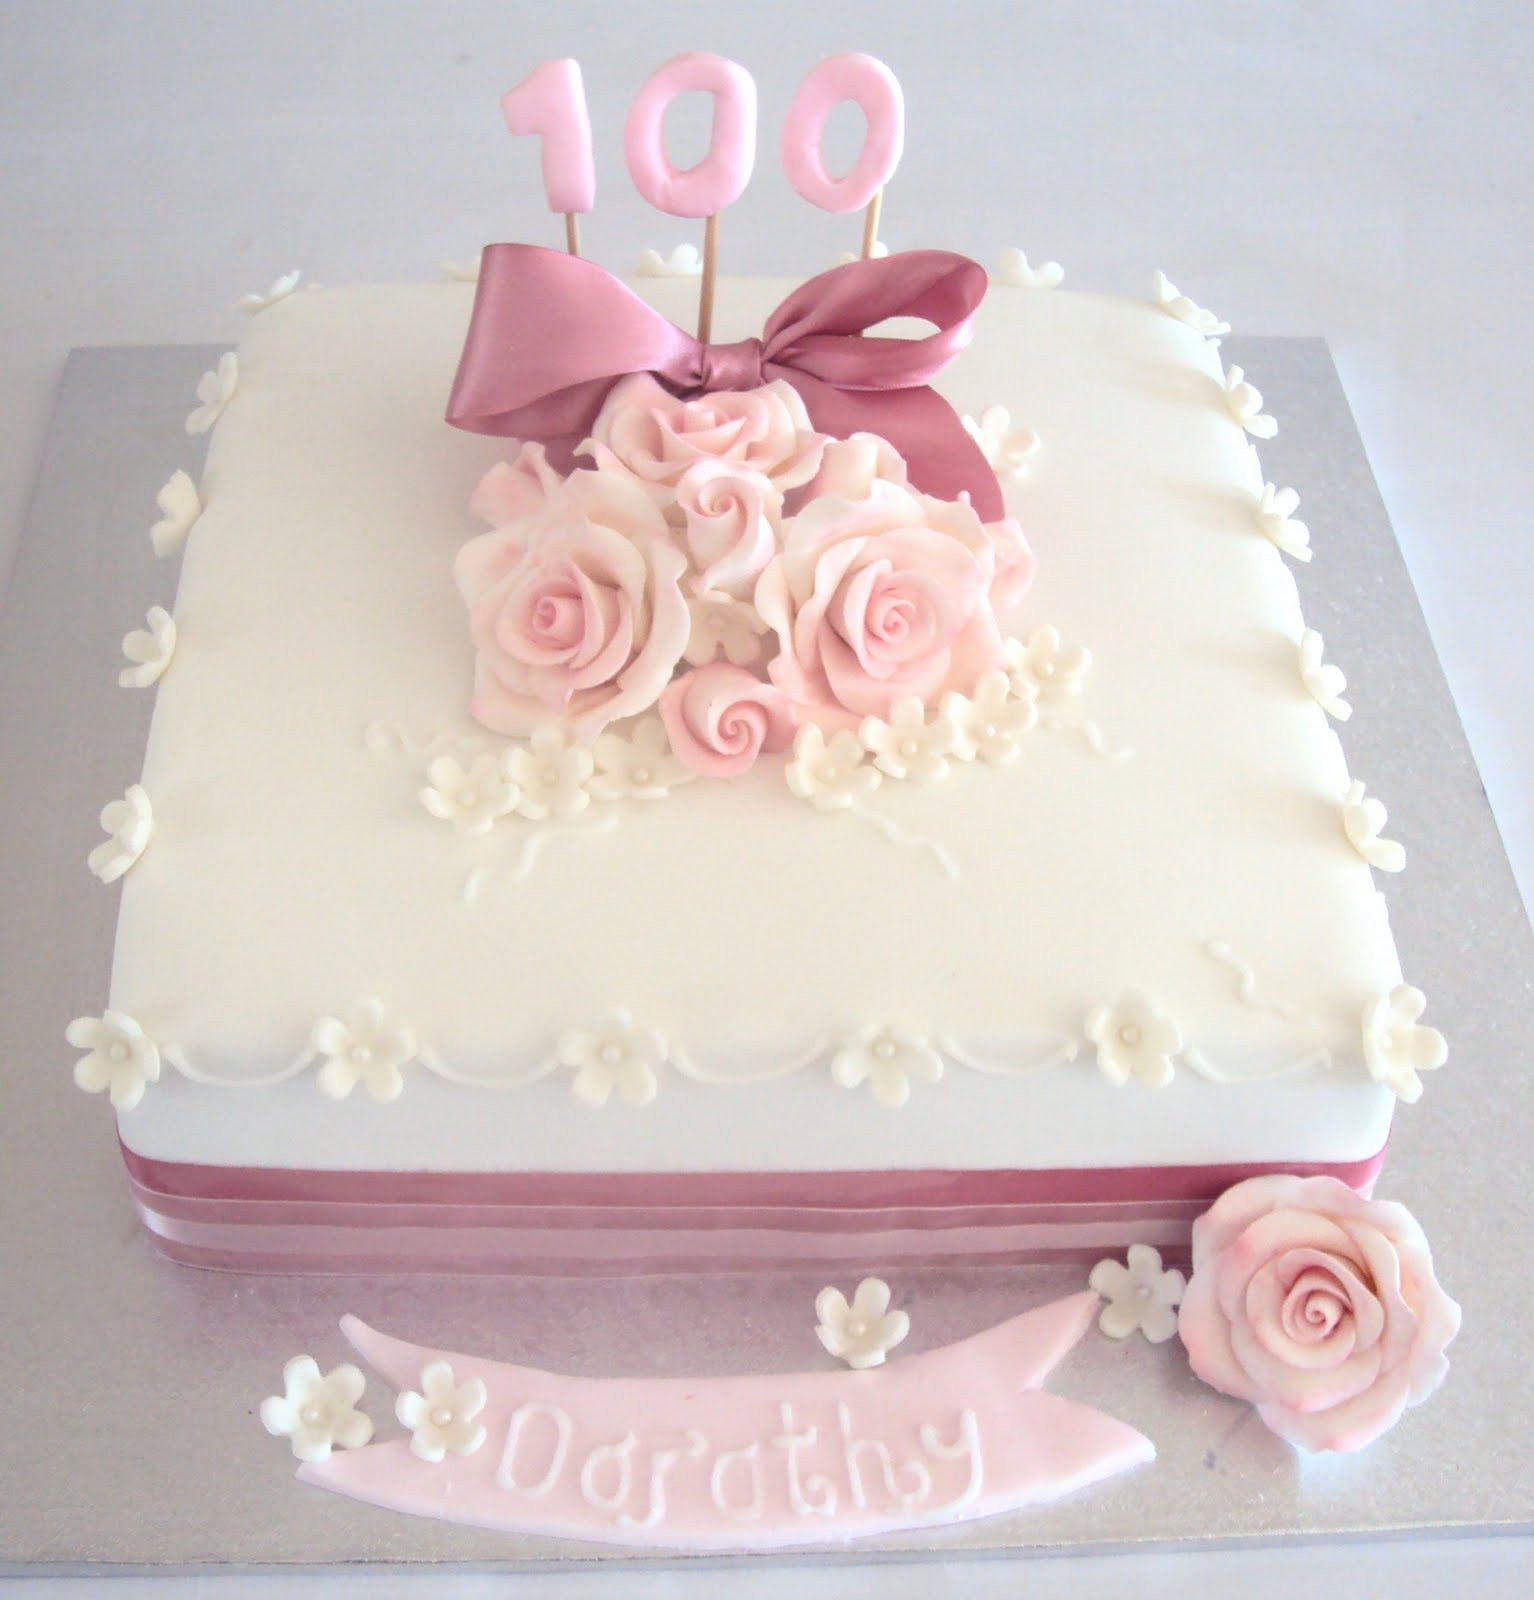 Best ideas about 100th Birthday Cake
. Save or Pin Flutterbye Cakes 100th Birthday Now.